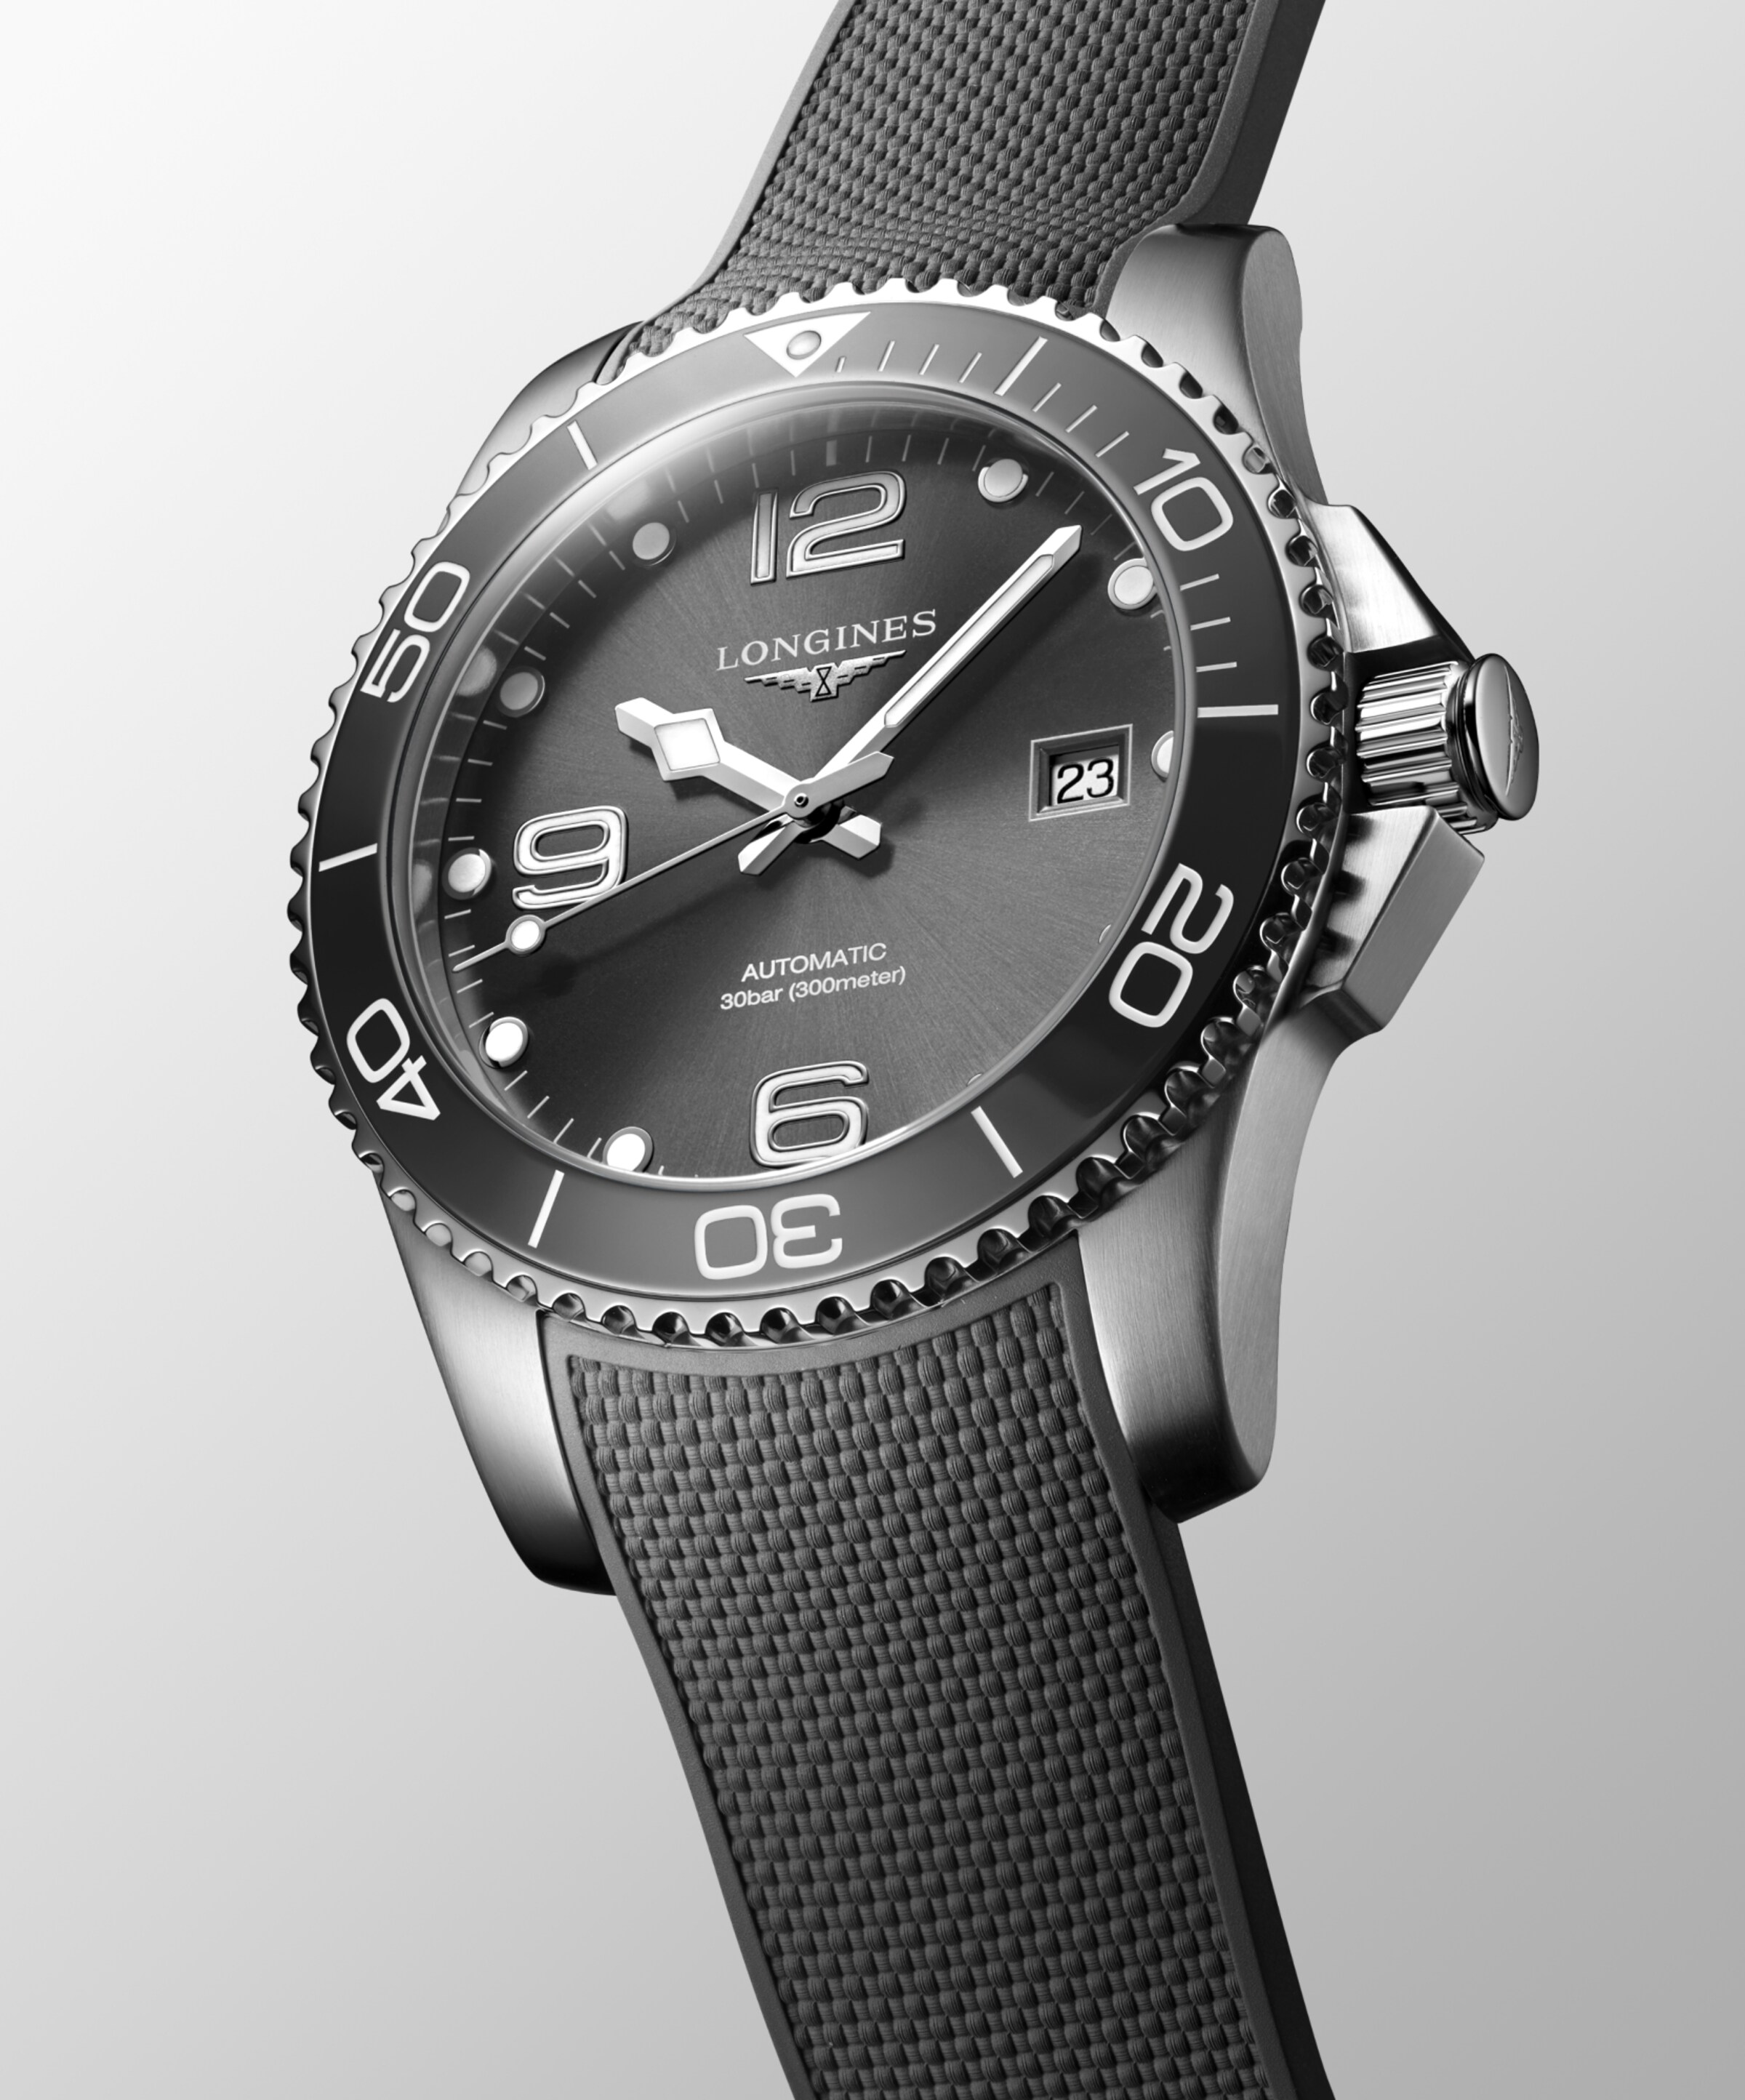 Longines HYDROCONQUEST Automatic Stainless steel and ceramic bezel Watch - L3.781.4.76.9